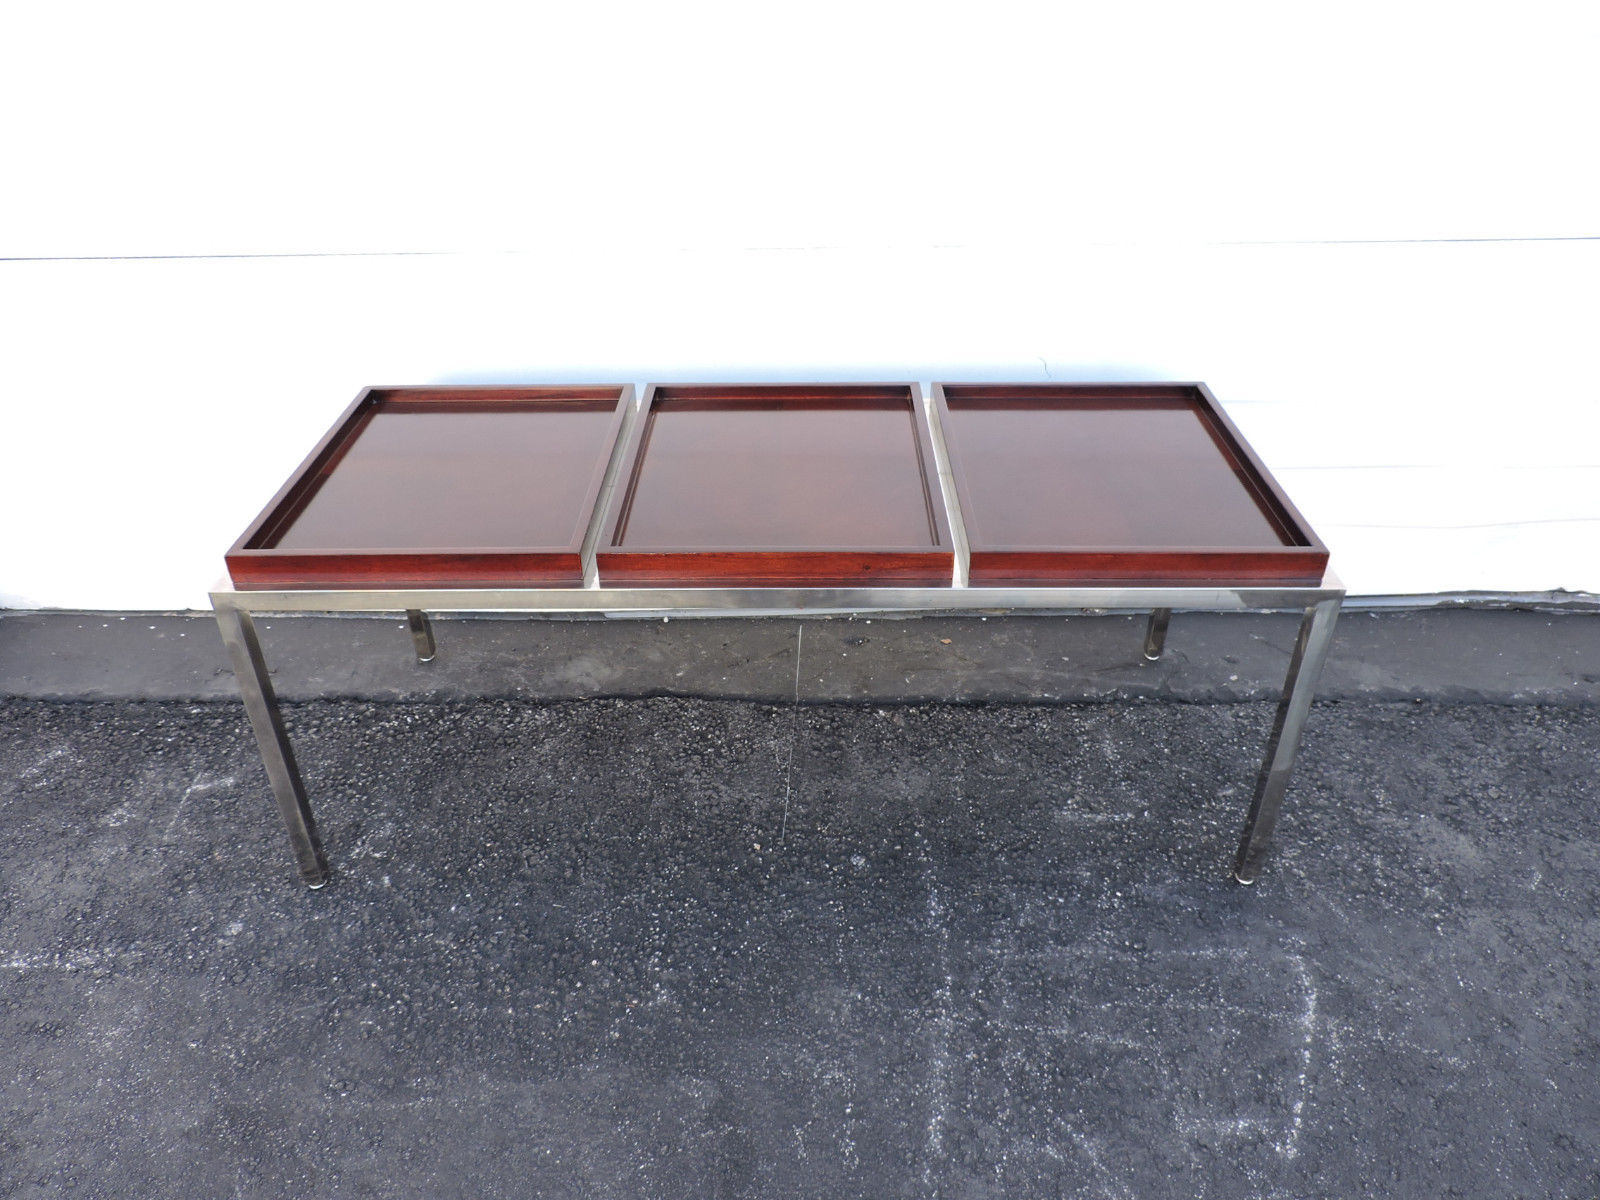 Vintage Mid-Century Modern Chrome and Wood Coffee Table by Mark David 6710